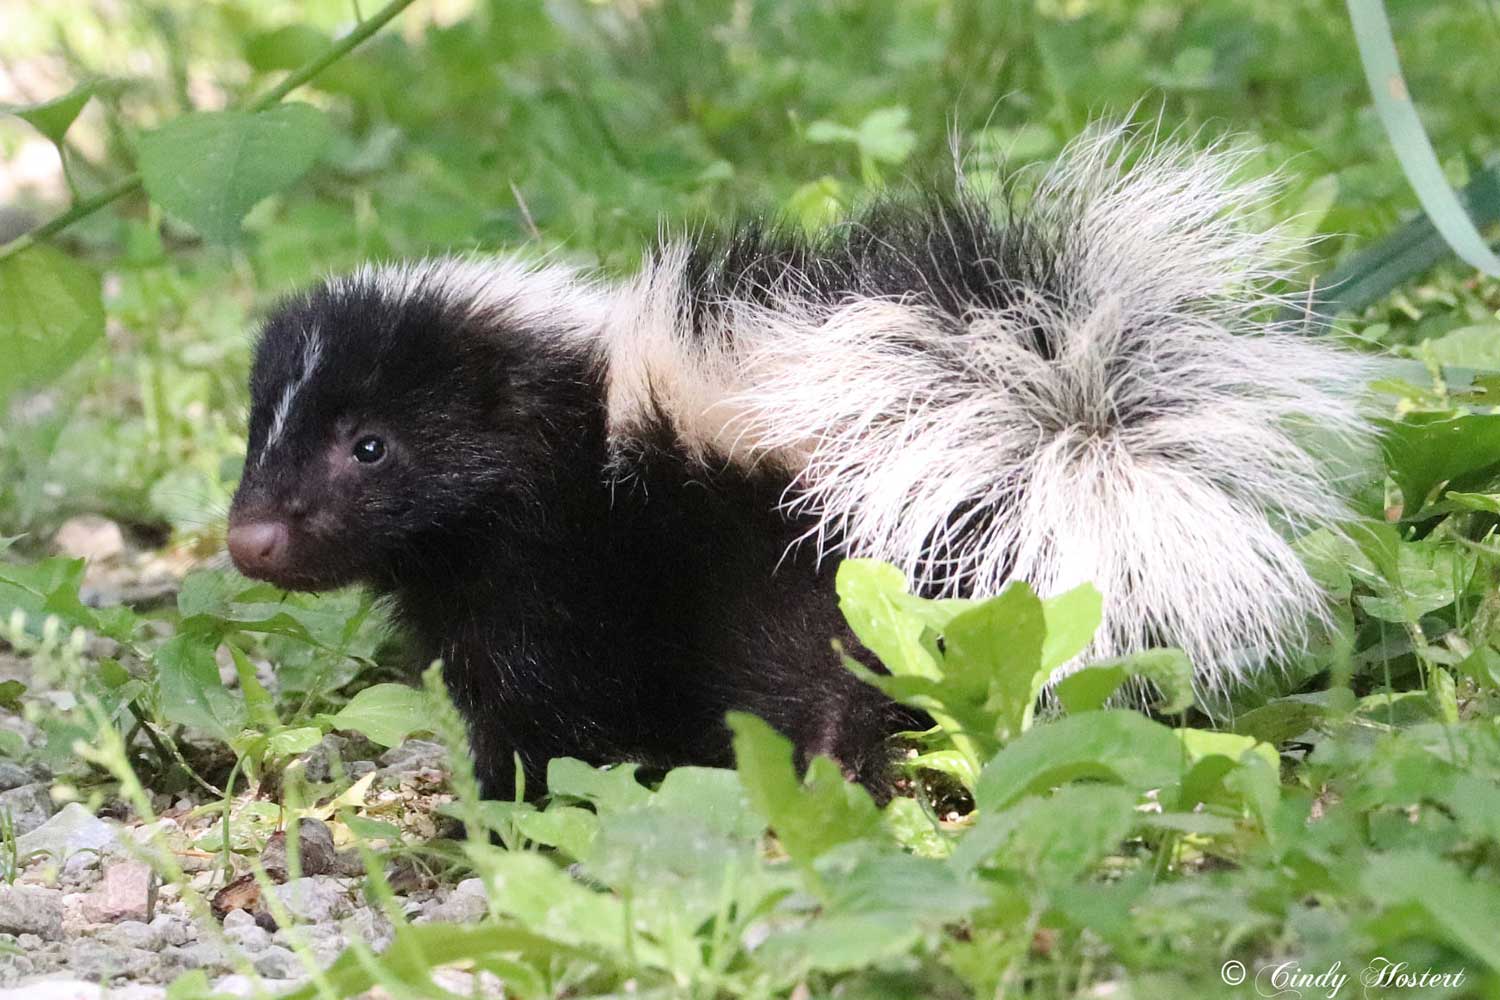 A skunk standing on a ground covered with rocks, grass and other vegetation.